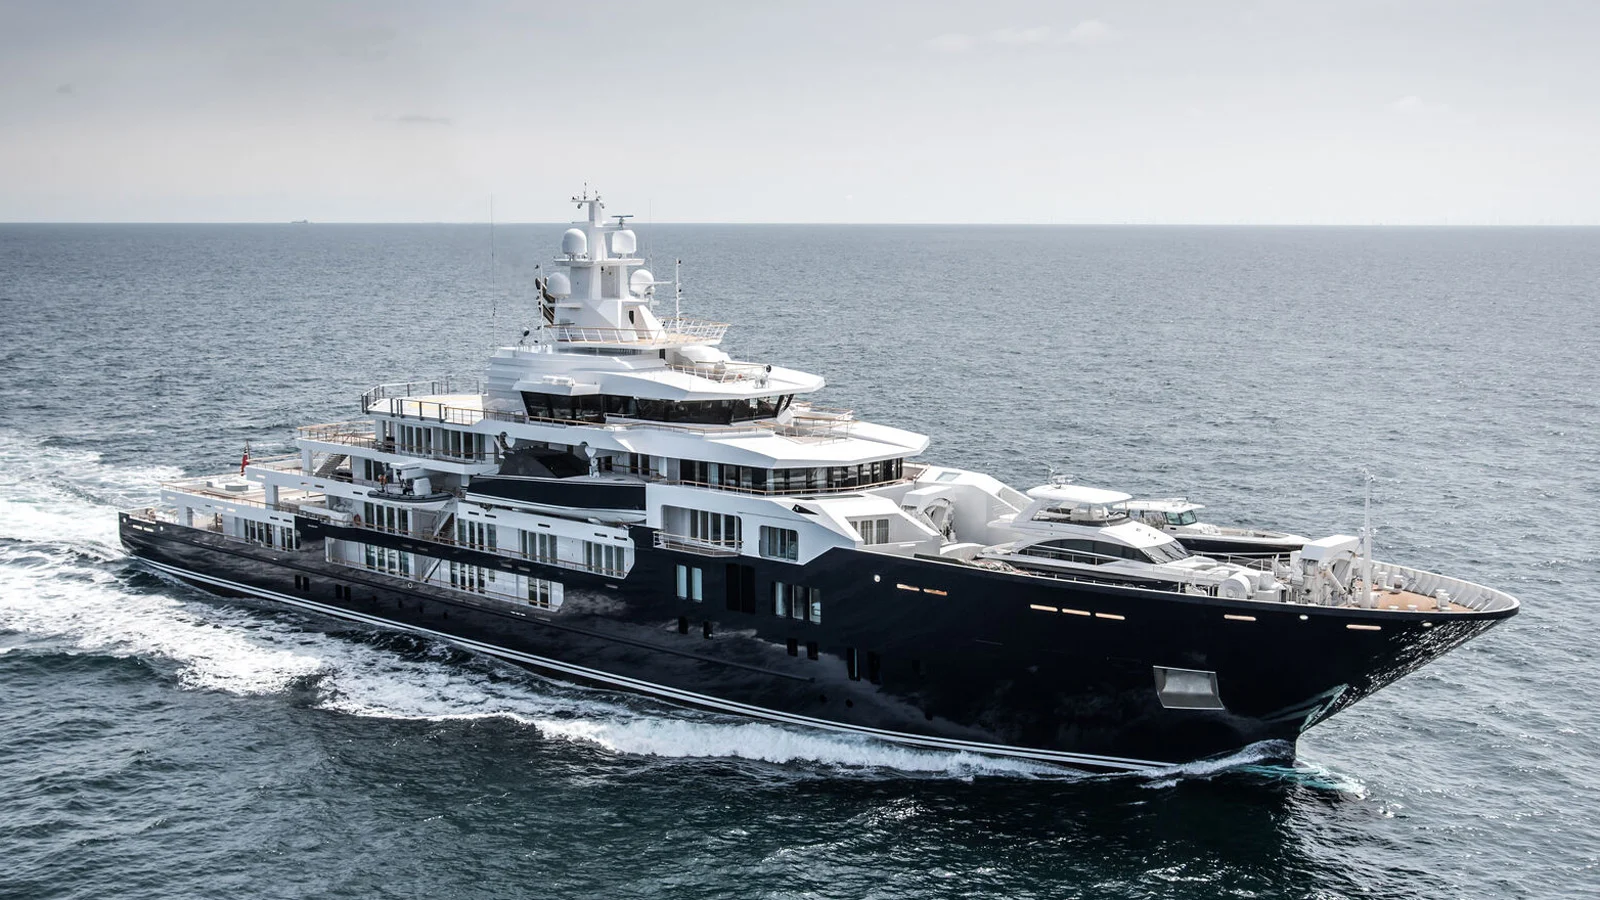 The 116-metre Ulysses explorer (now Multiverse) features three foredecks